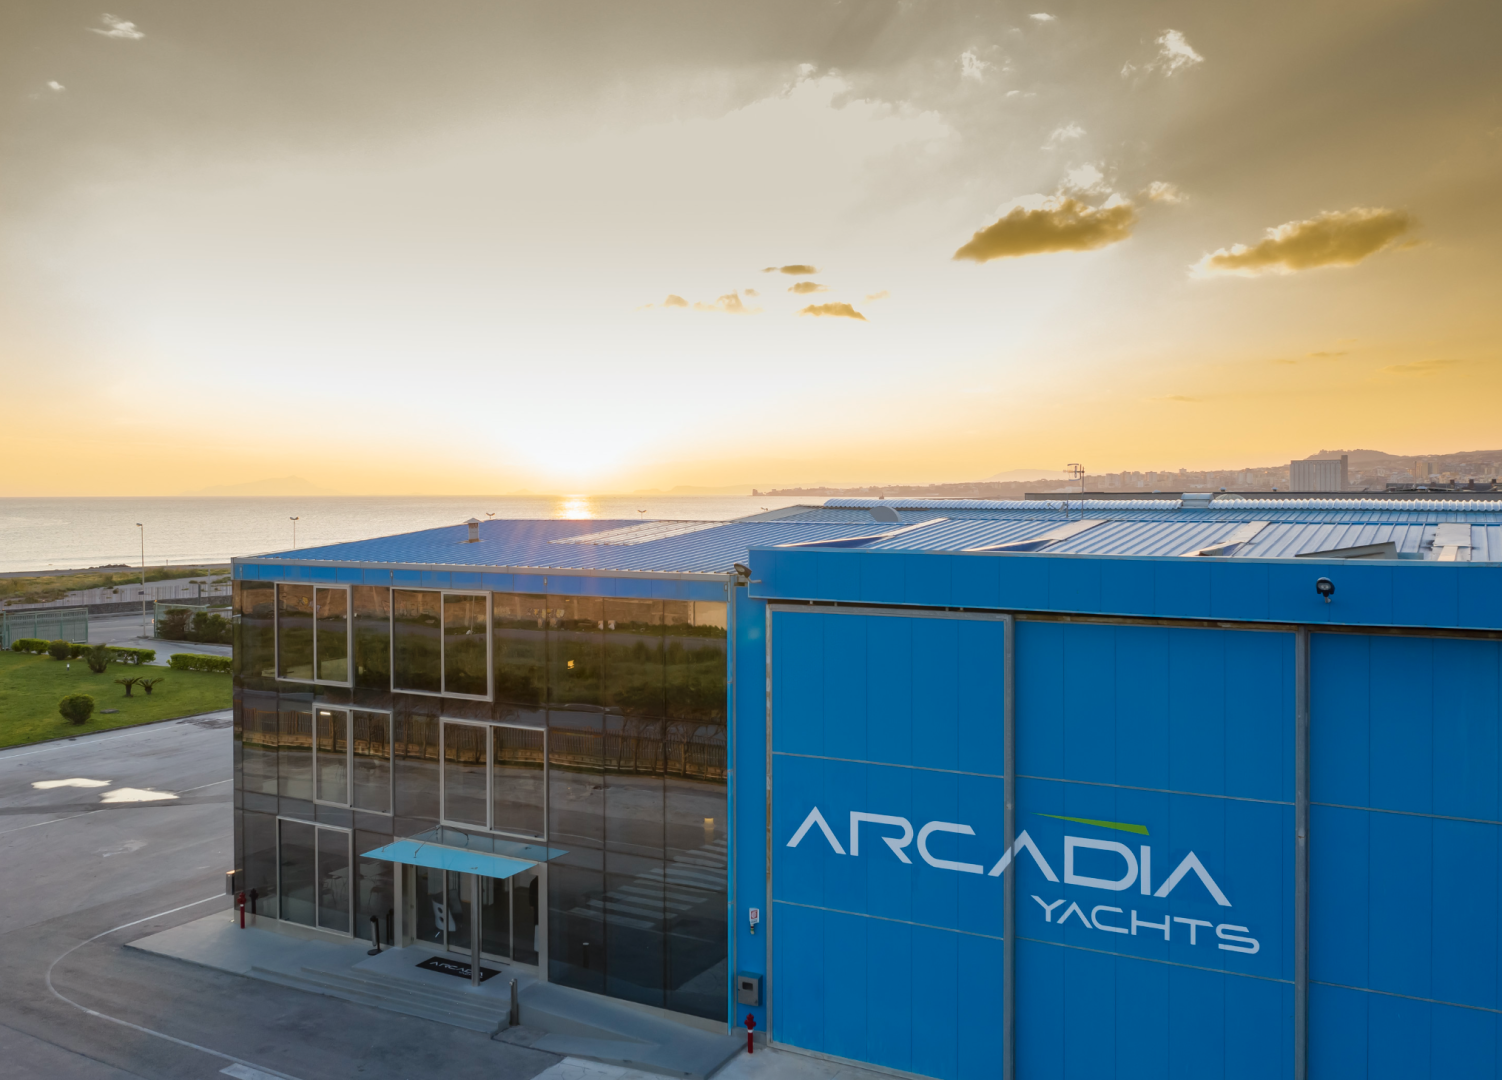 Arcadia Yachts: to face the future with responsibility & confidence